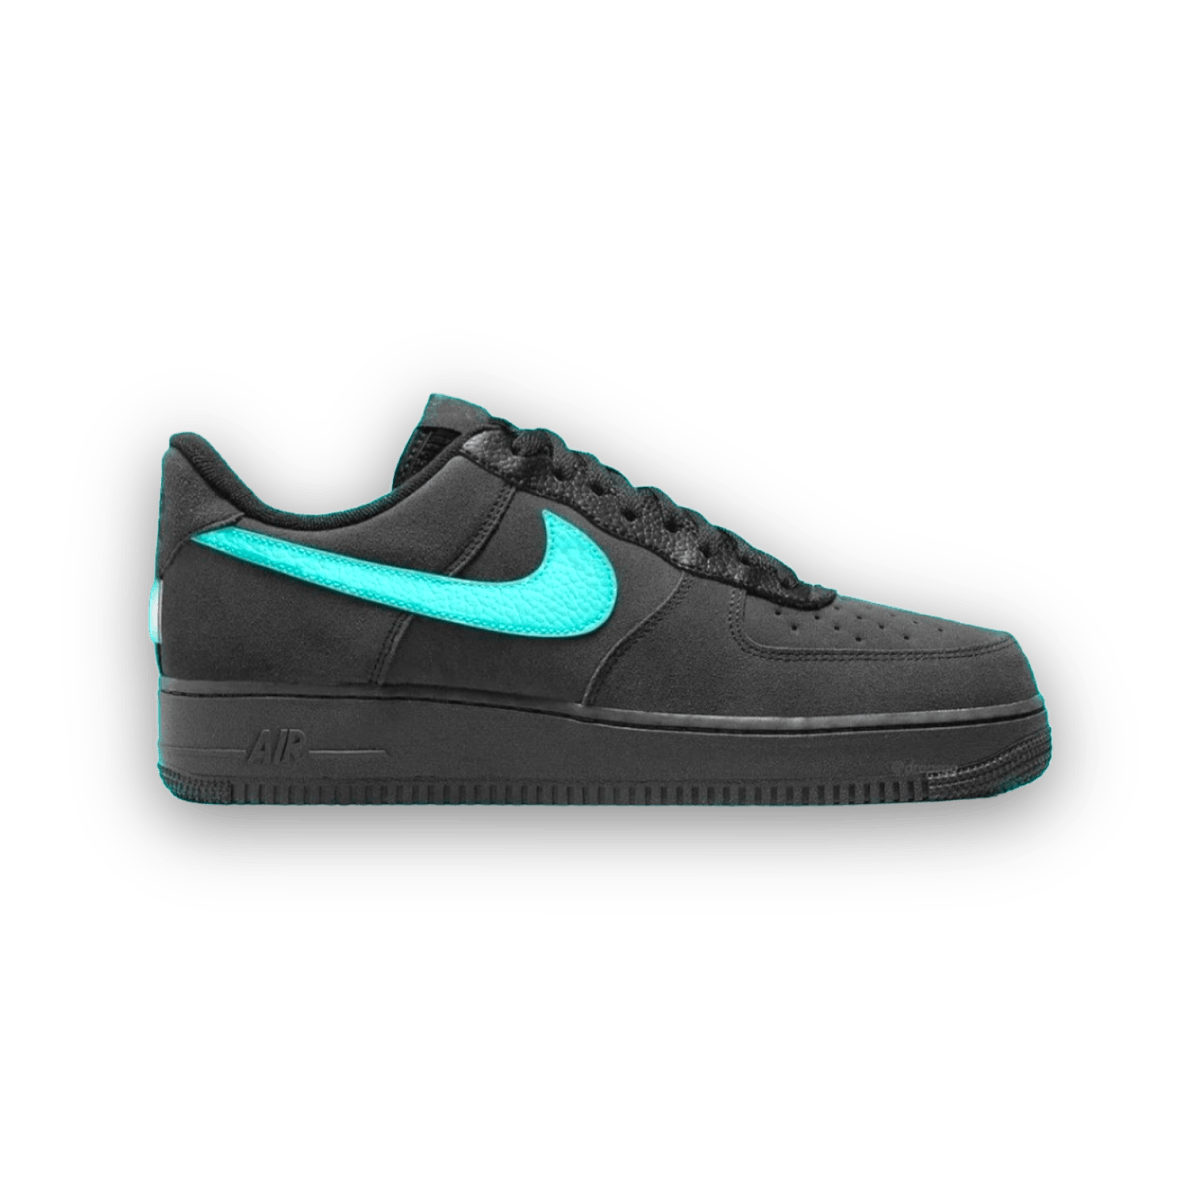 Tiffany & Co. x Air Force 1 Low '1837' - Low Sneaker - Nike - Jawns on Fire - sneakers